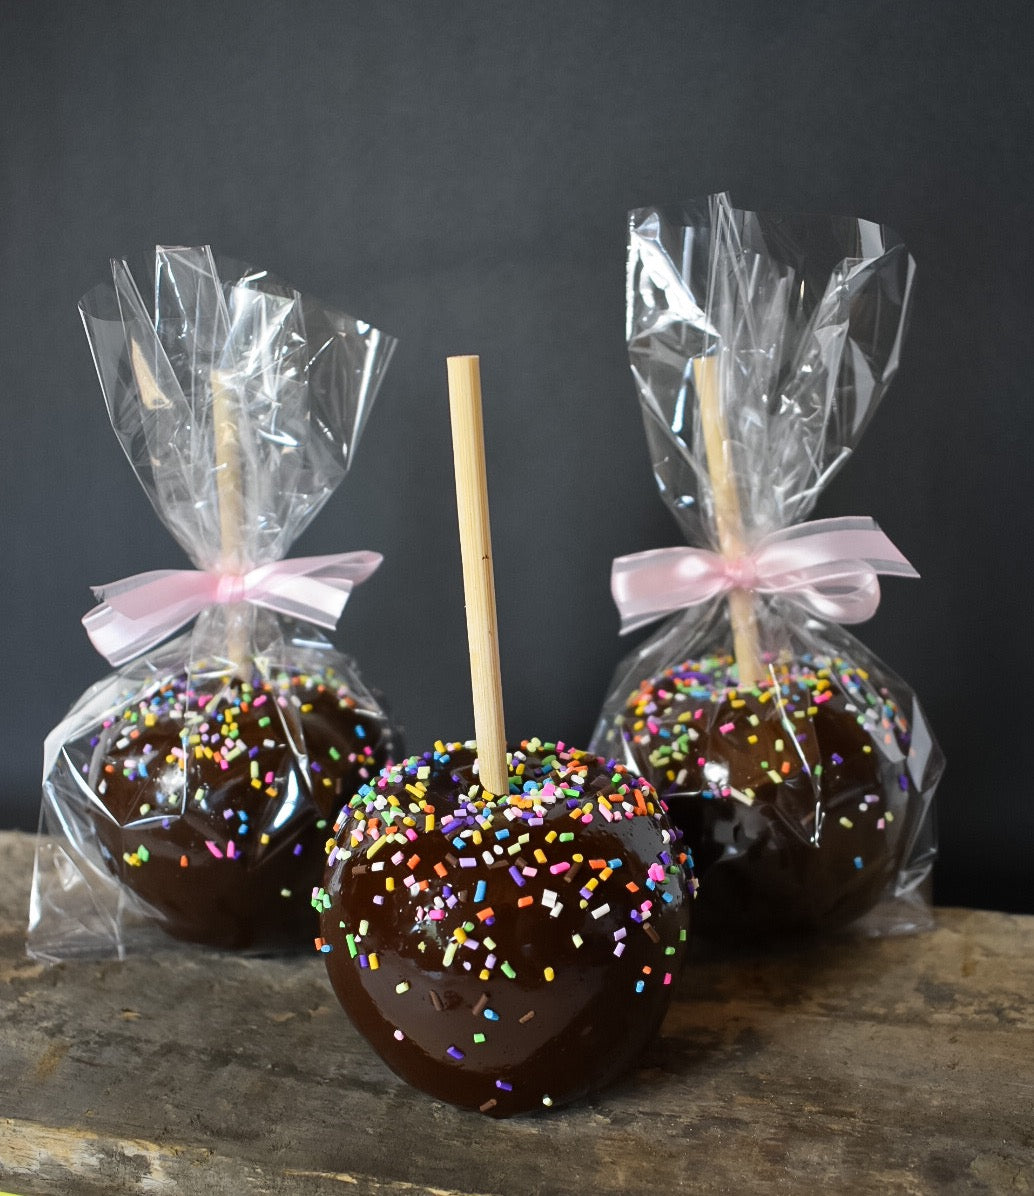 Permanent Chocolate Apple with Sprinkles